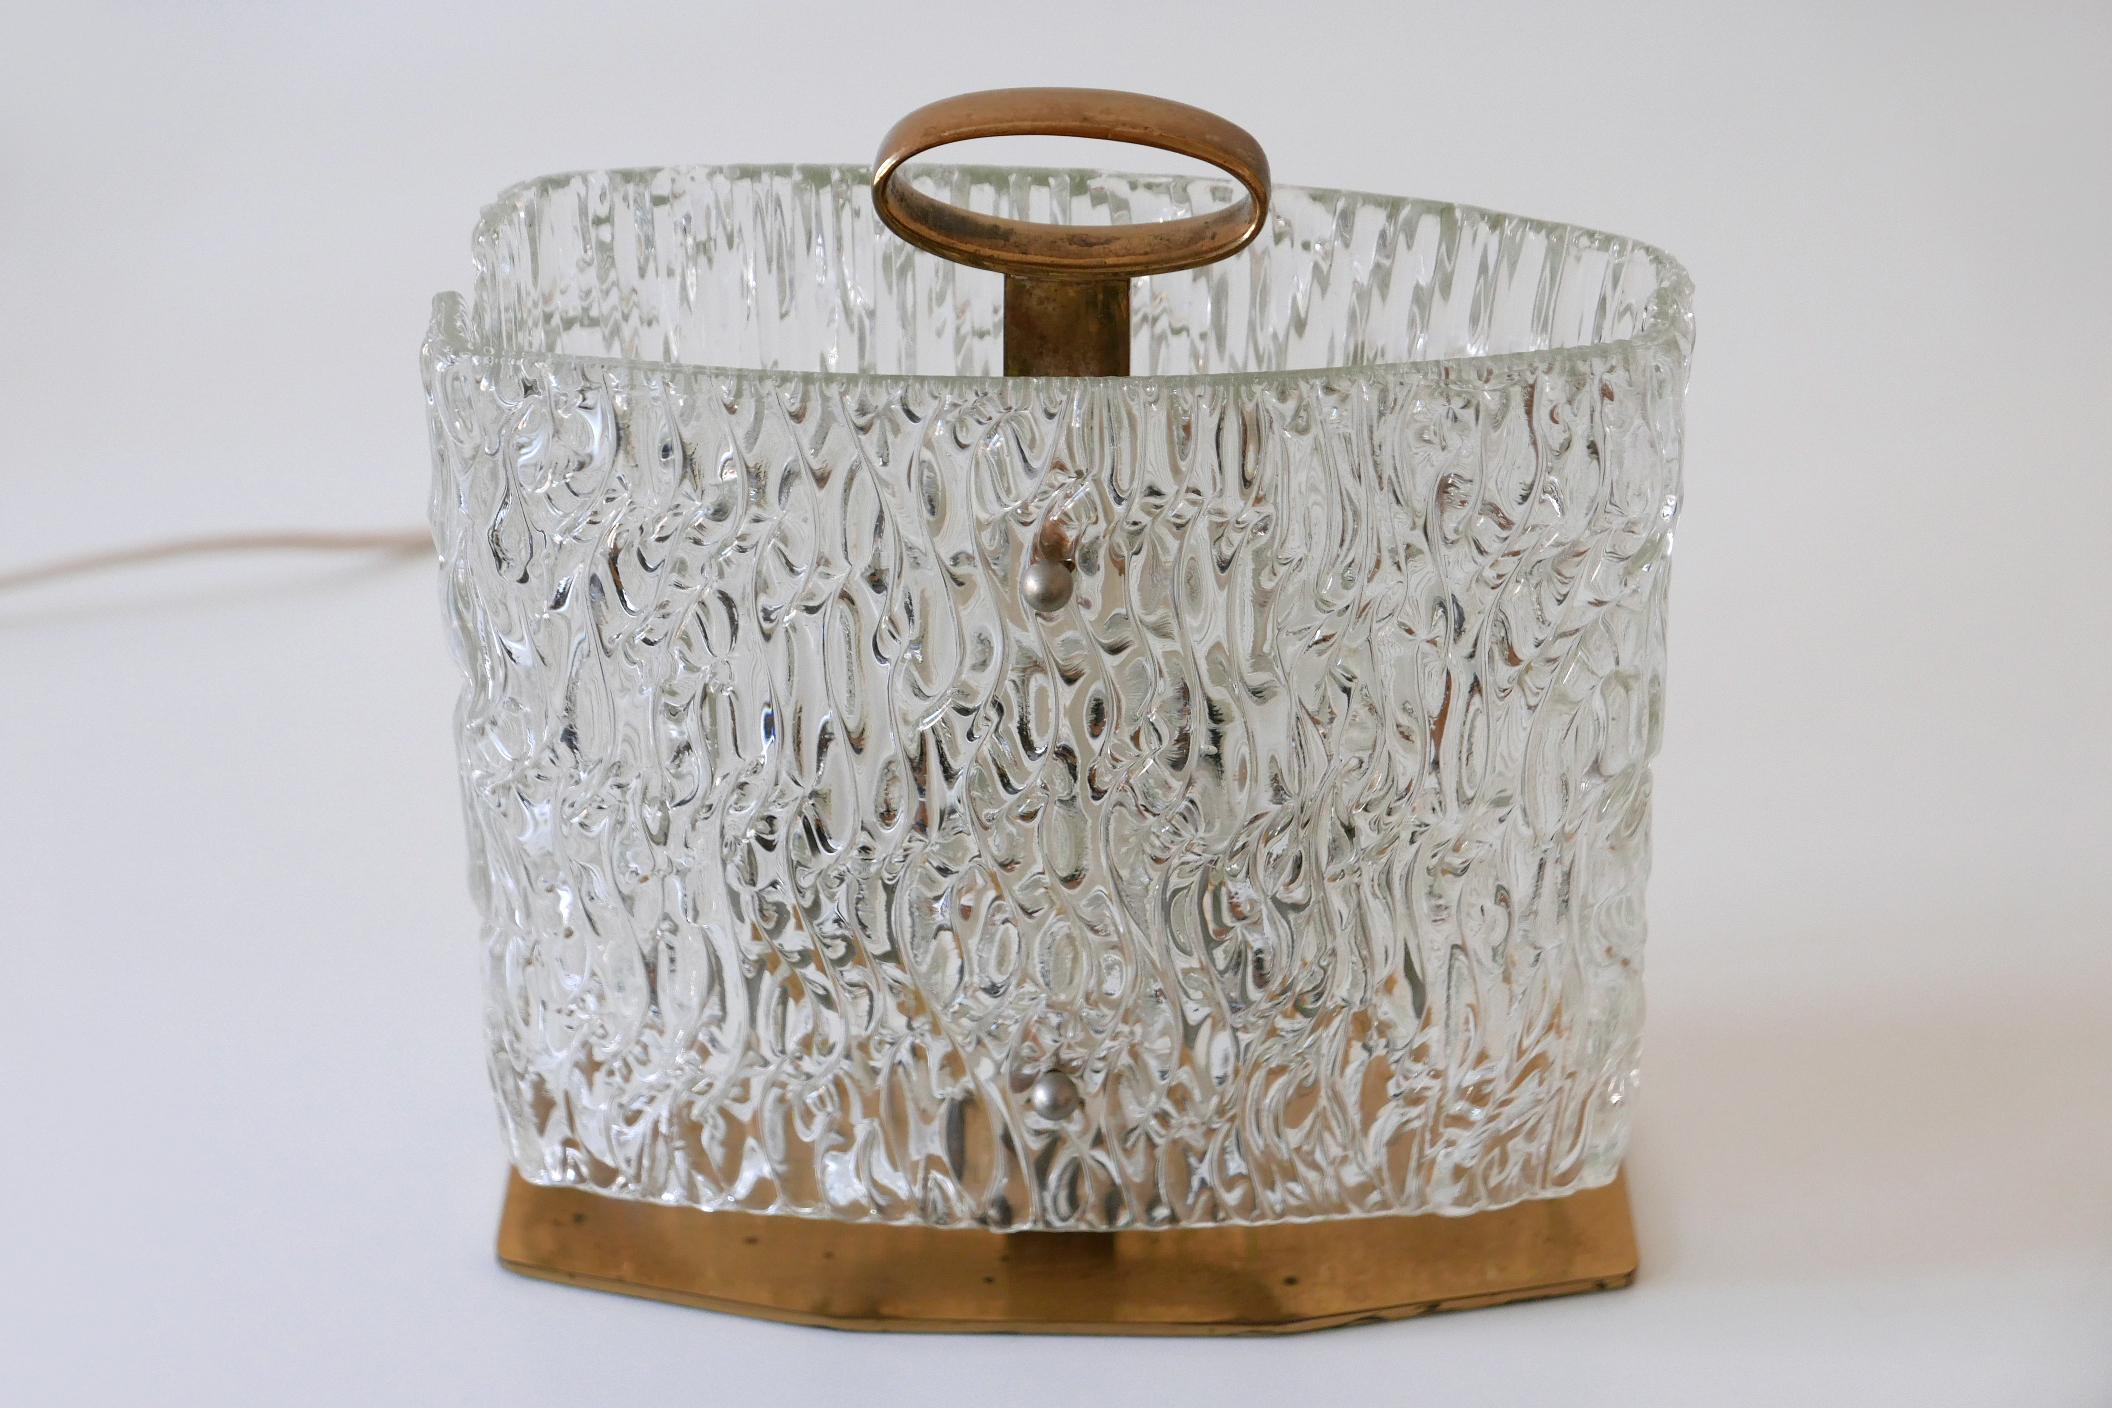 Exceptional Mid-Century Modern Table Lamp with Ice Glass Shade, 1950s, Italy For Sale 7